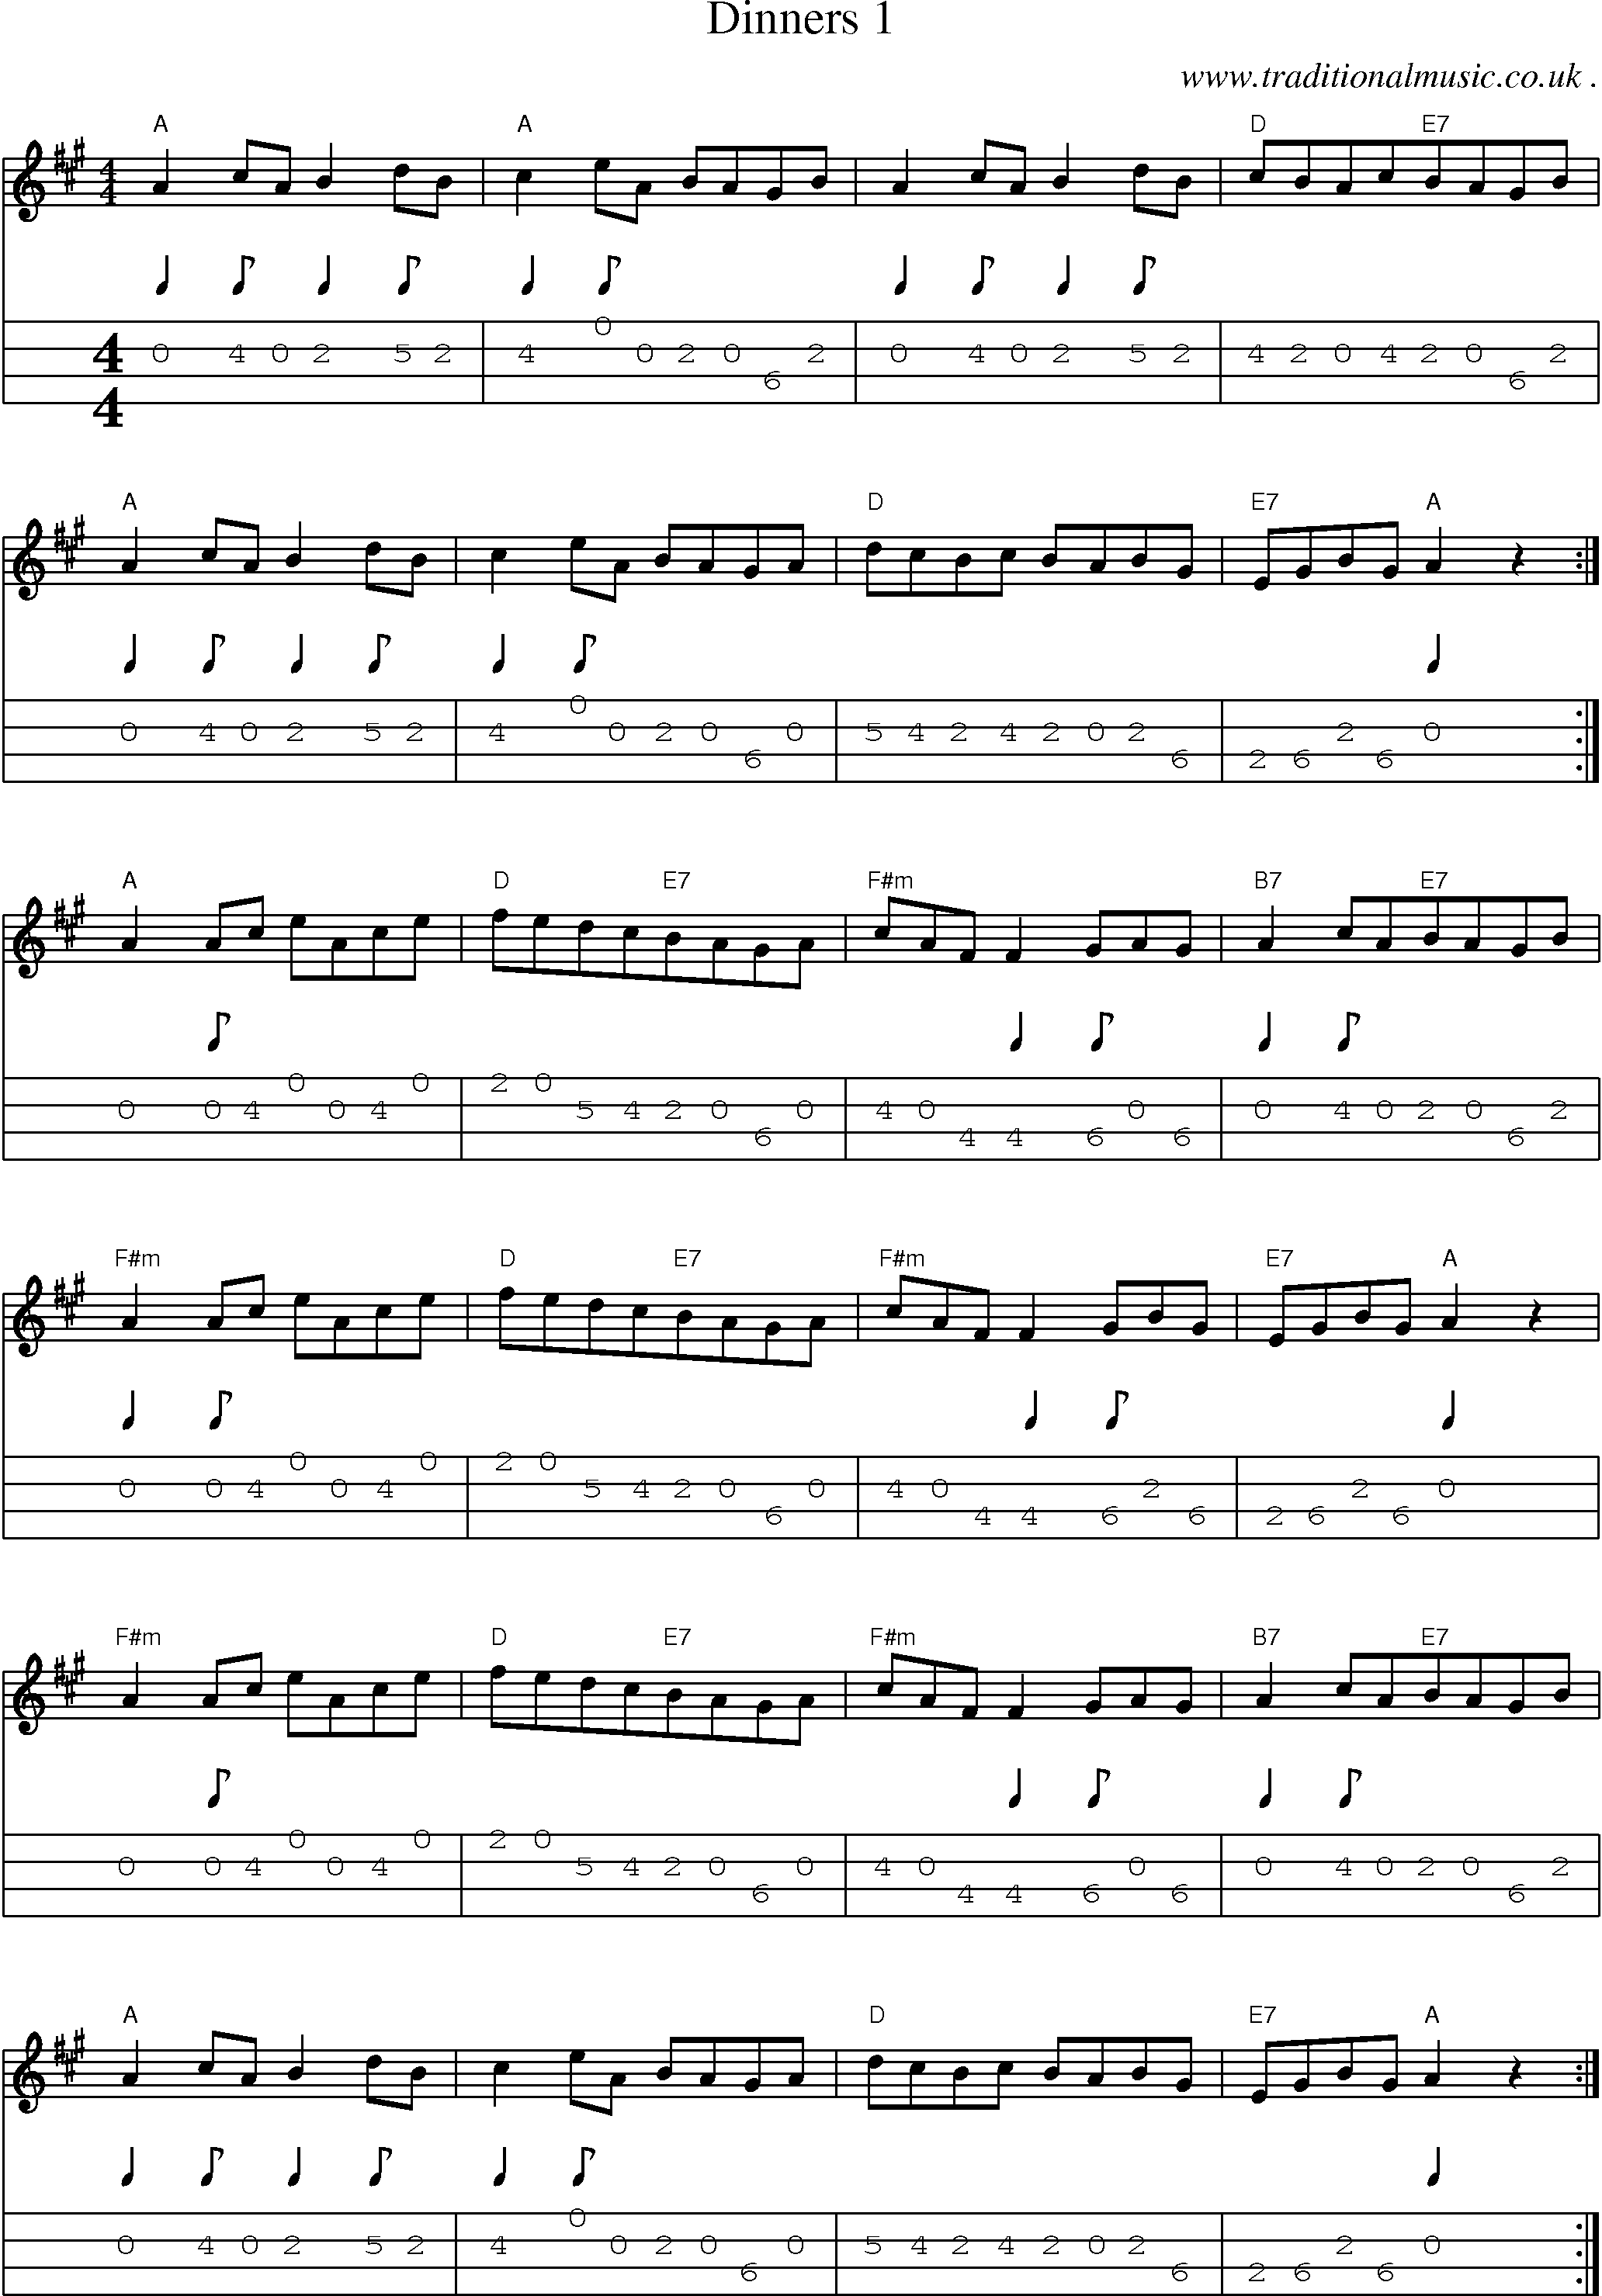 Sheet-Music and Mandolin Tabs for Dinners 1